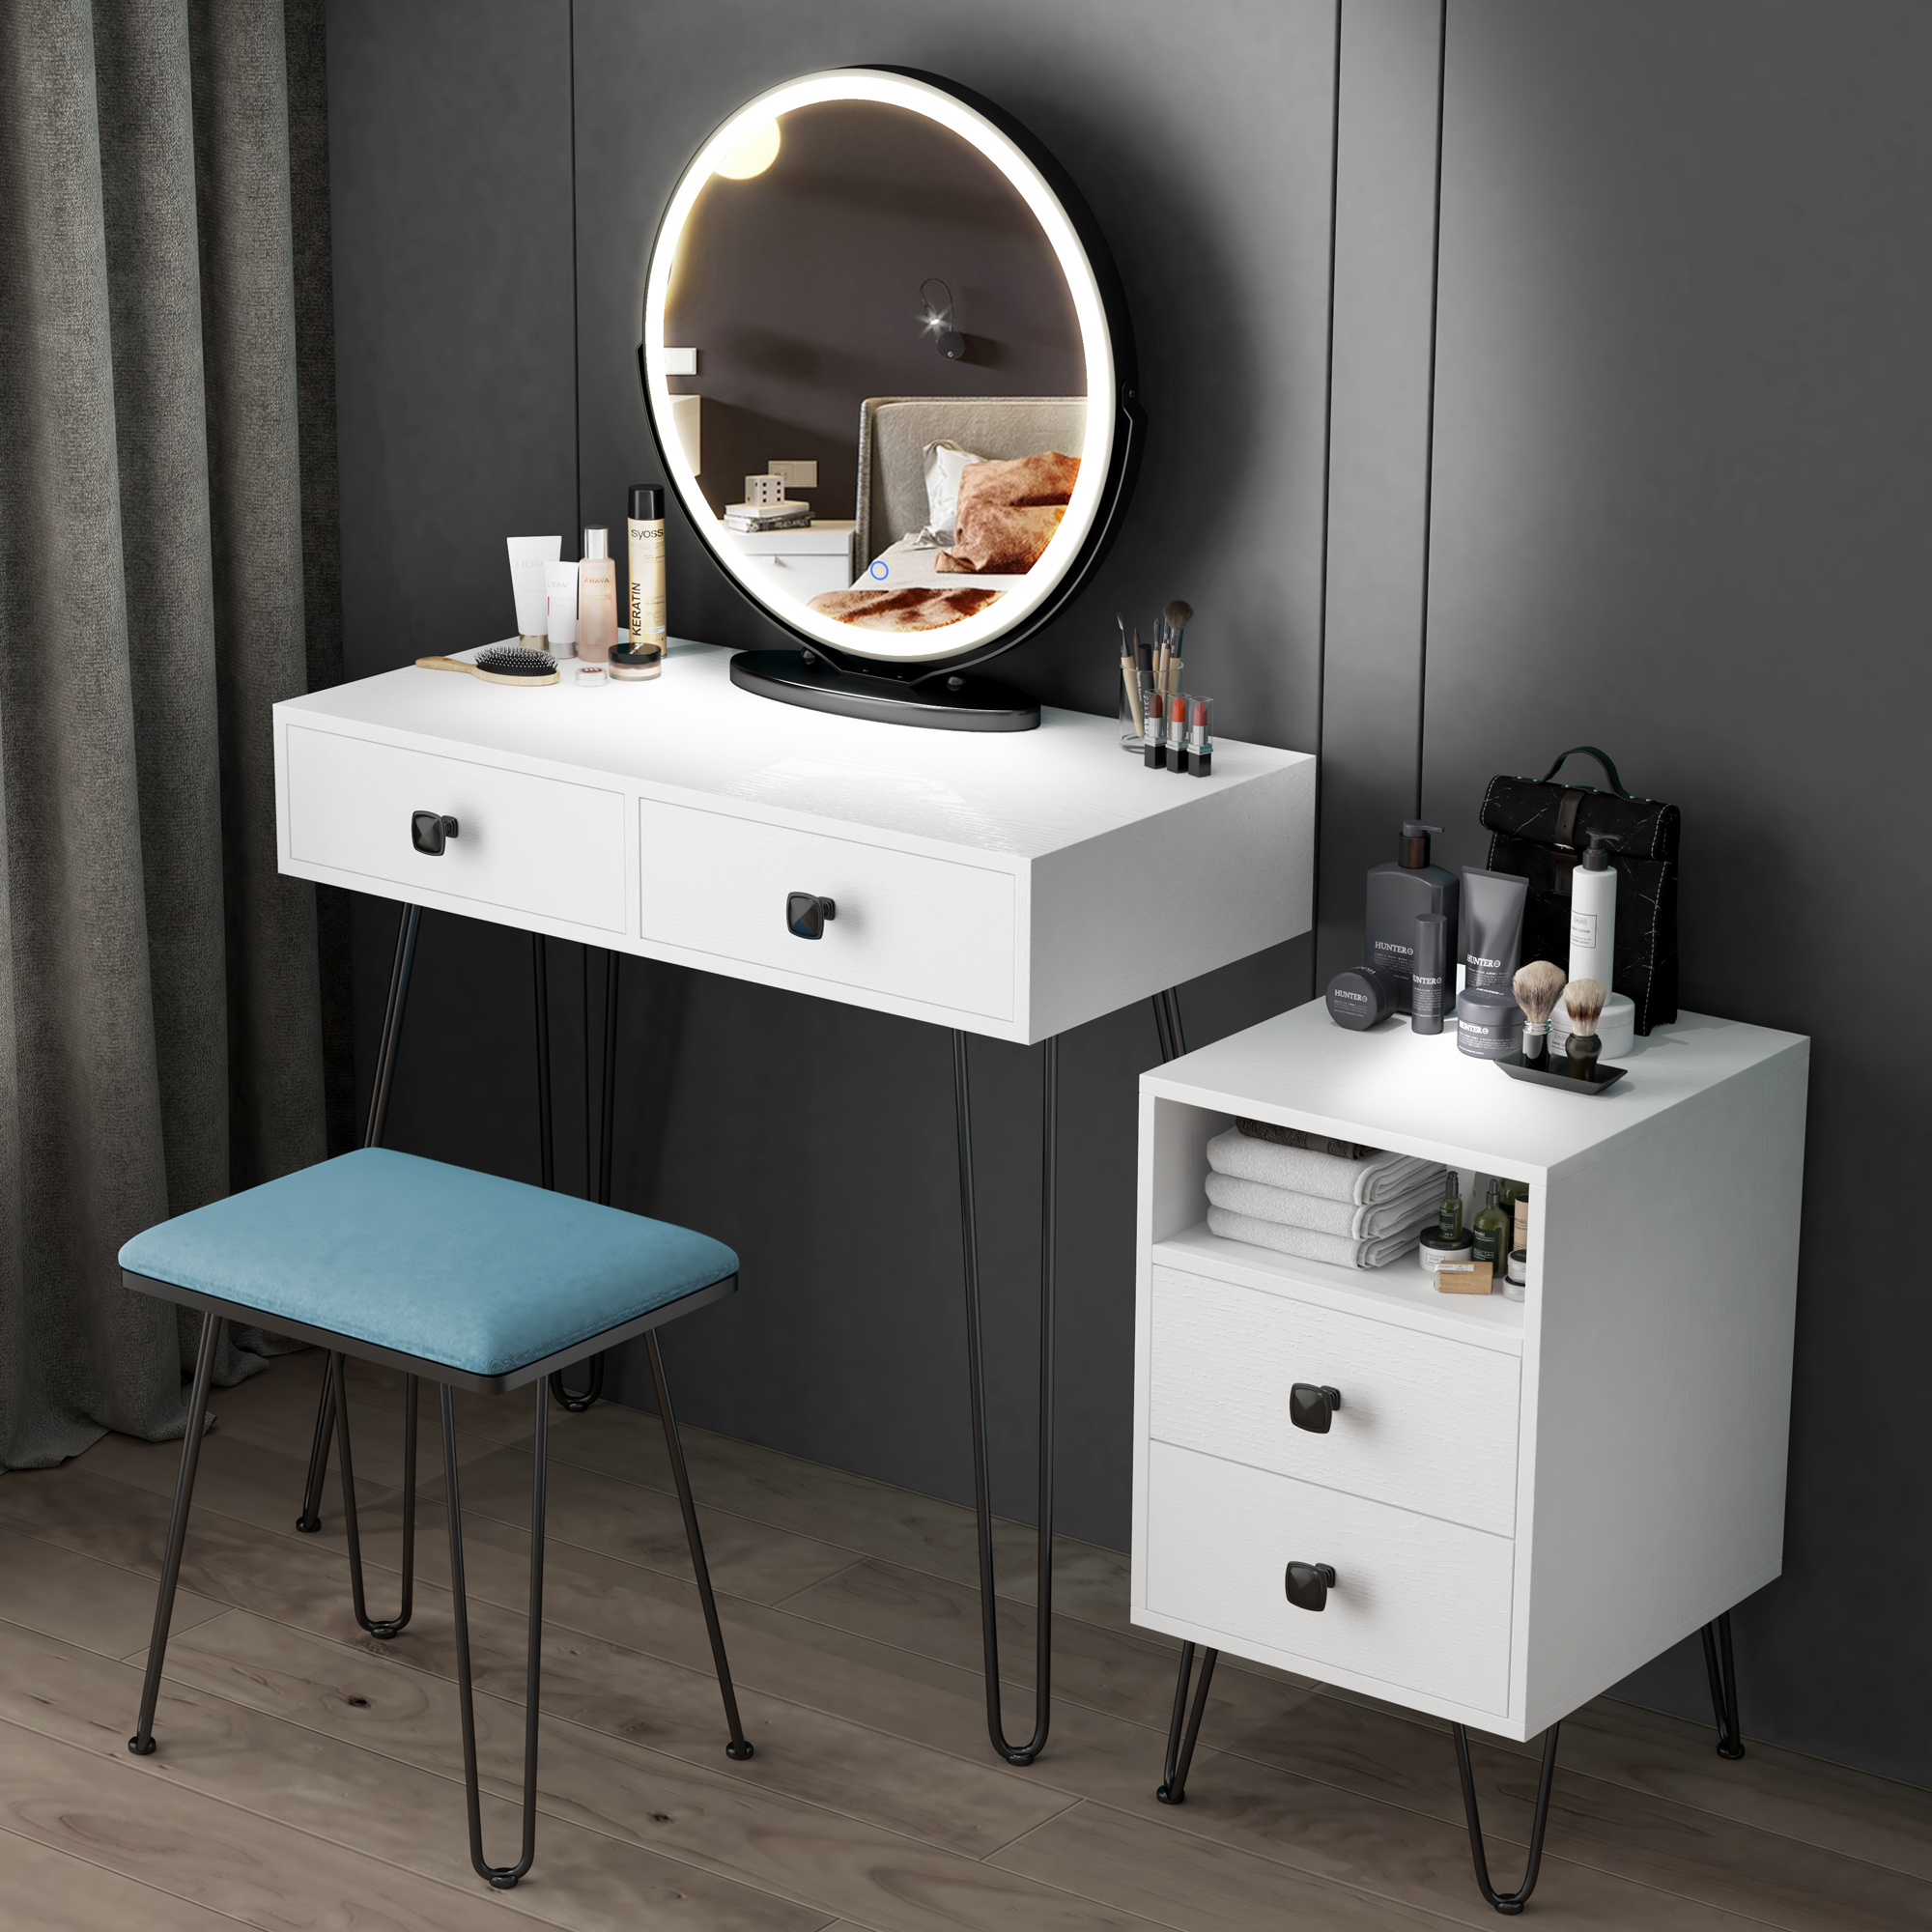 LVSOMT Pure white Makeup Vanity Set with Mirror & Stool